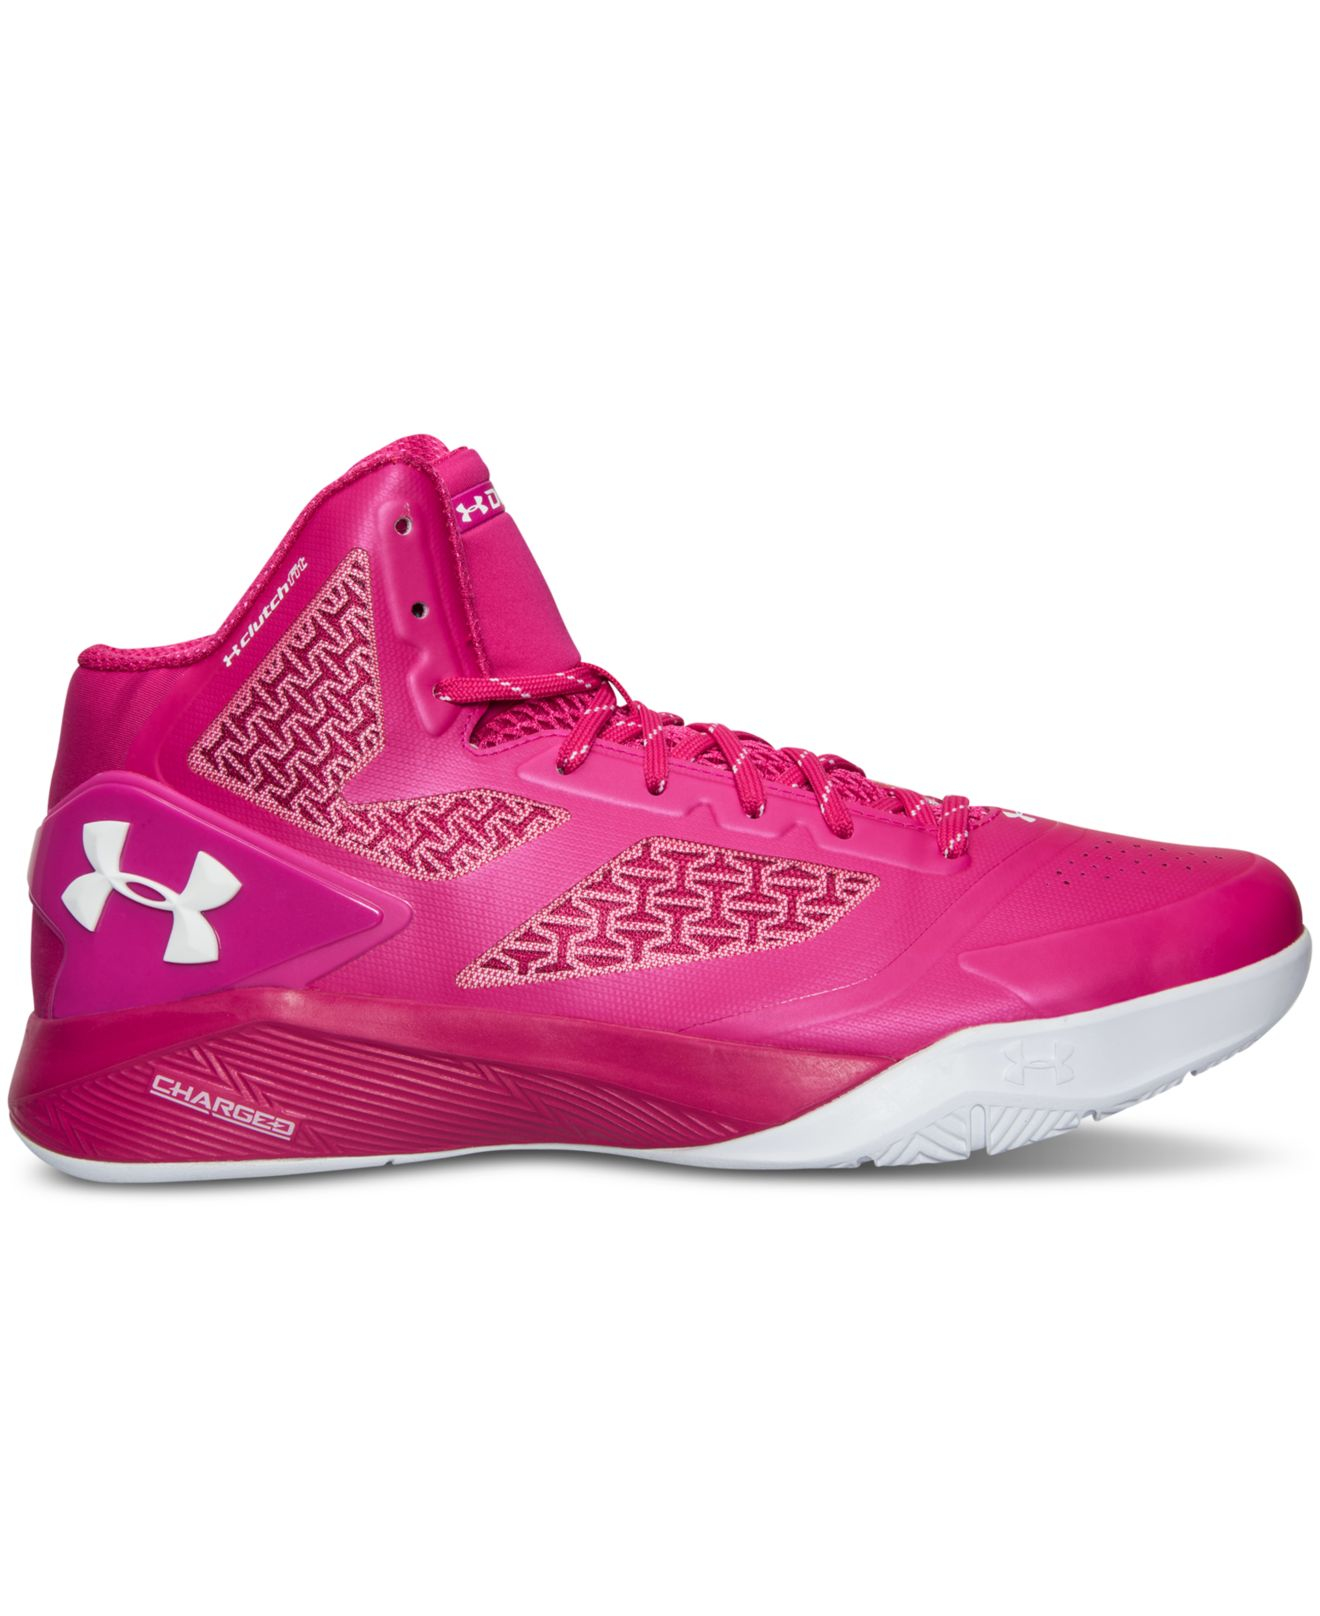 mens pink under armour shoes Online 